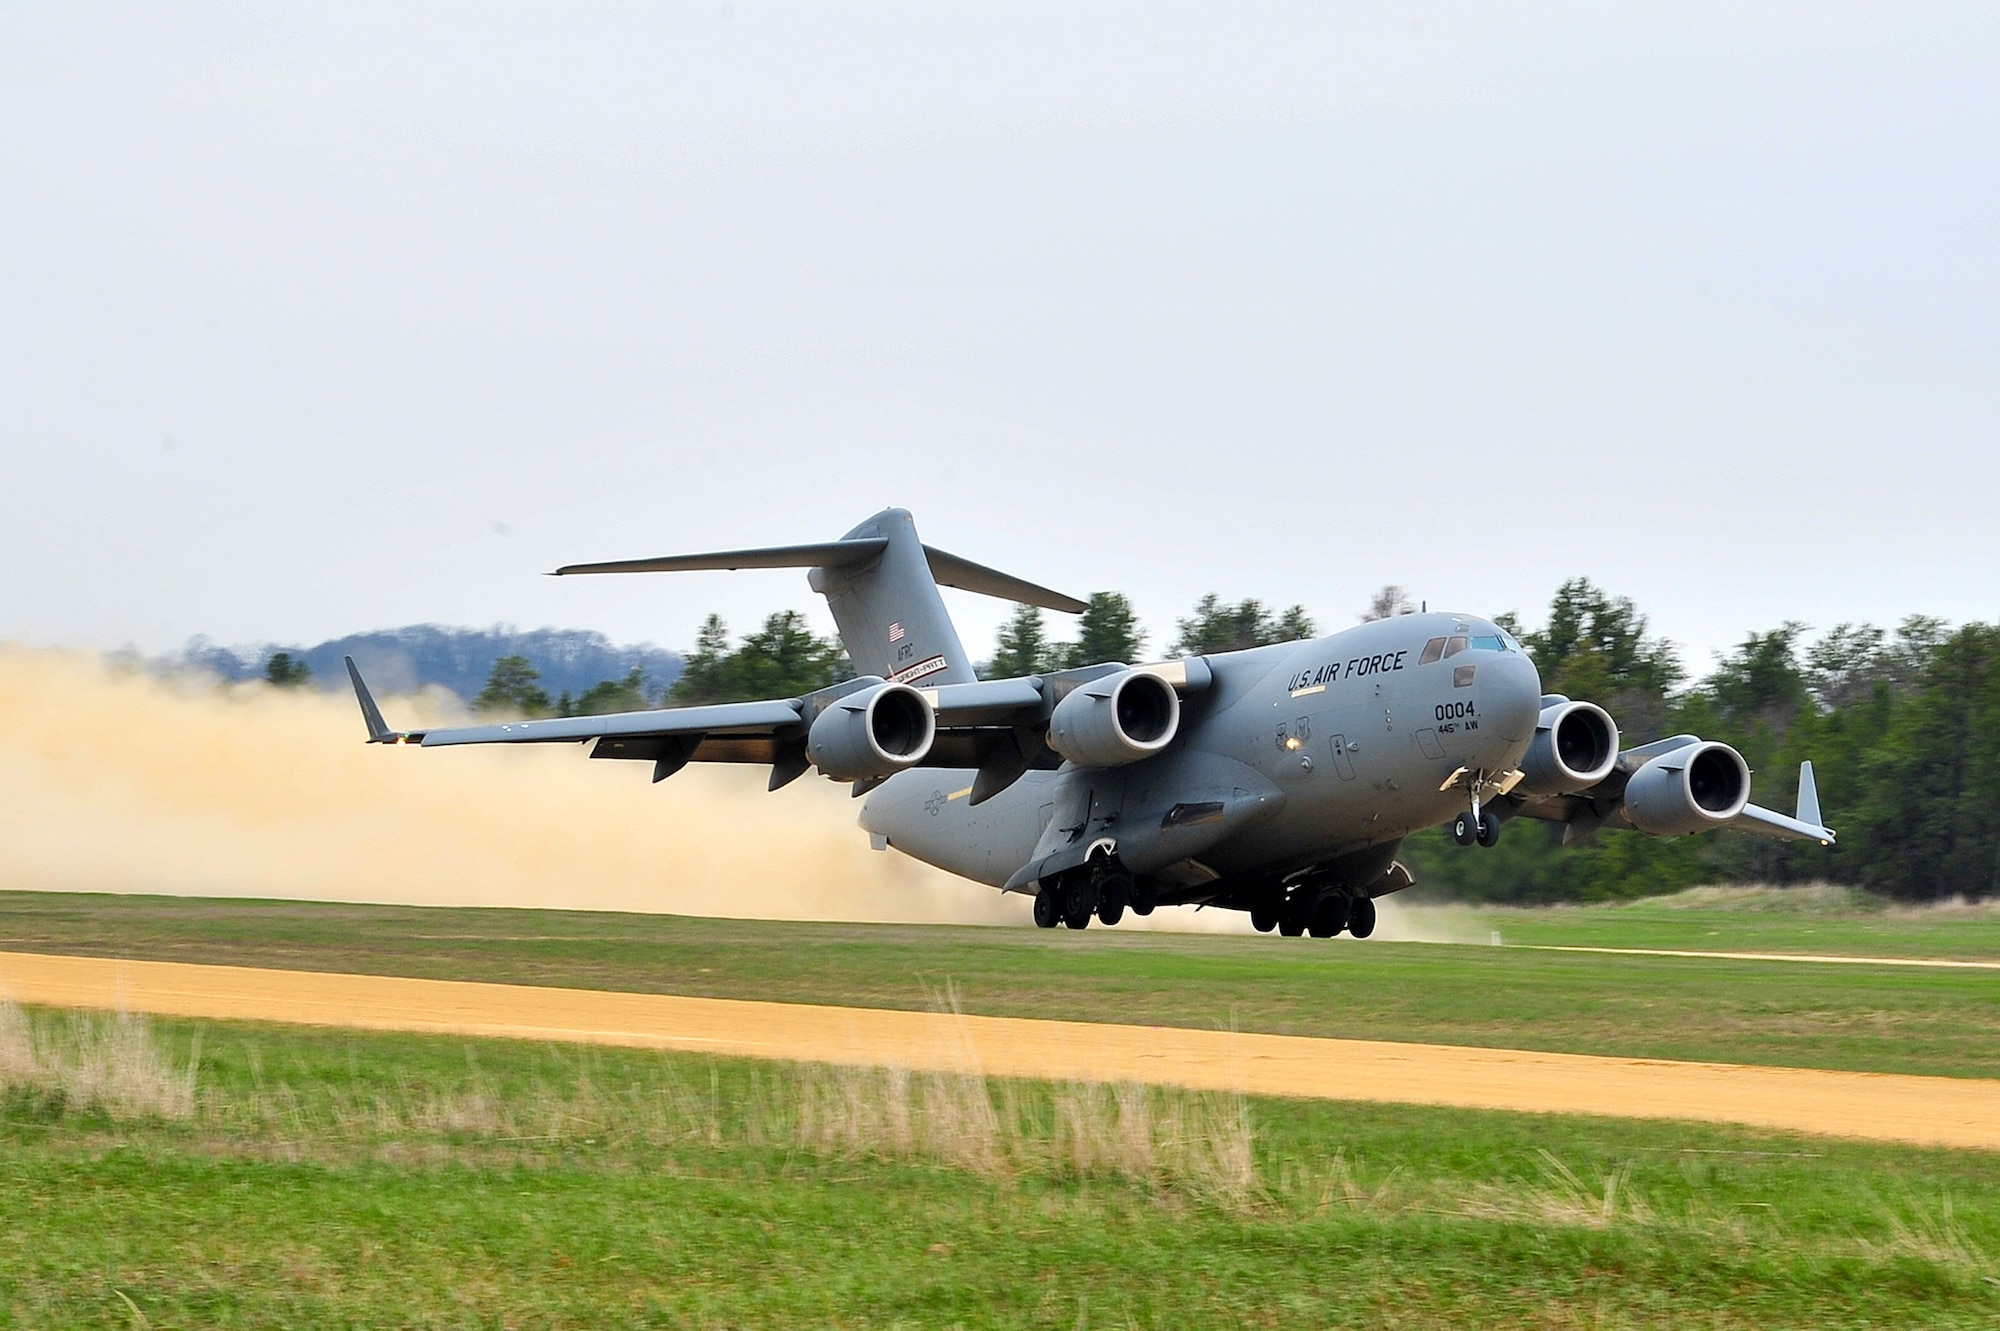 A 445th Airlift Wing C-17 Globemaster III takes off from the Young Air Assault Strip on May 7, 2014 during exercise Patriot Warrior at Fort McCoy, Wis. United States military reserve components from all branches participate in combined exercises Patriot Warrior, Global Medic, Diamond Saber and CSTX in preparation for upcoming deployments in joint environments. (U.S. Air Force photo by Master Sgt. Francisco V. Govea II/ Released)